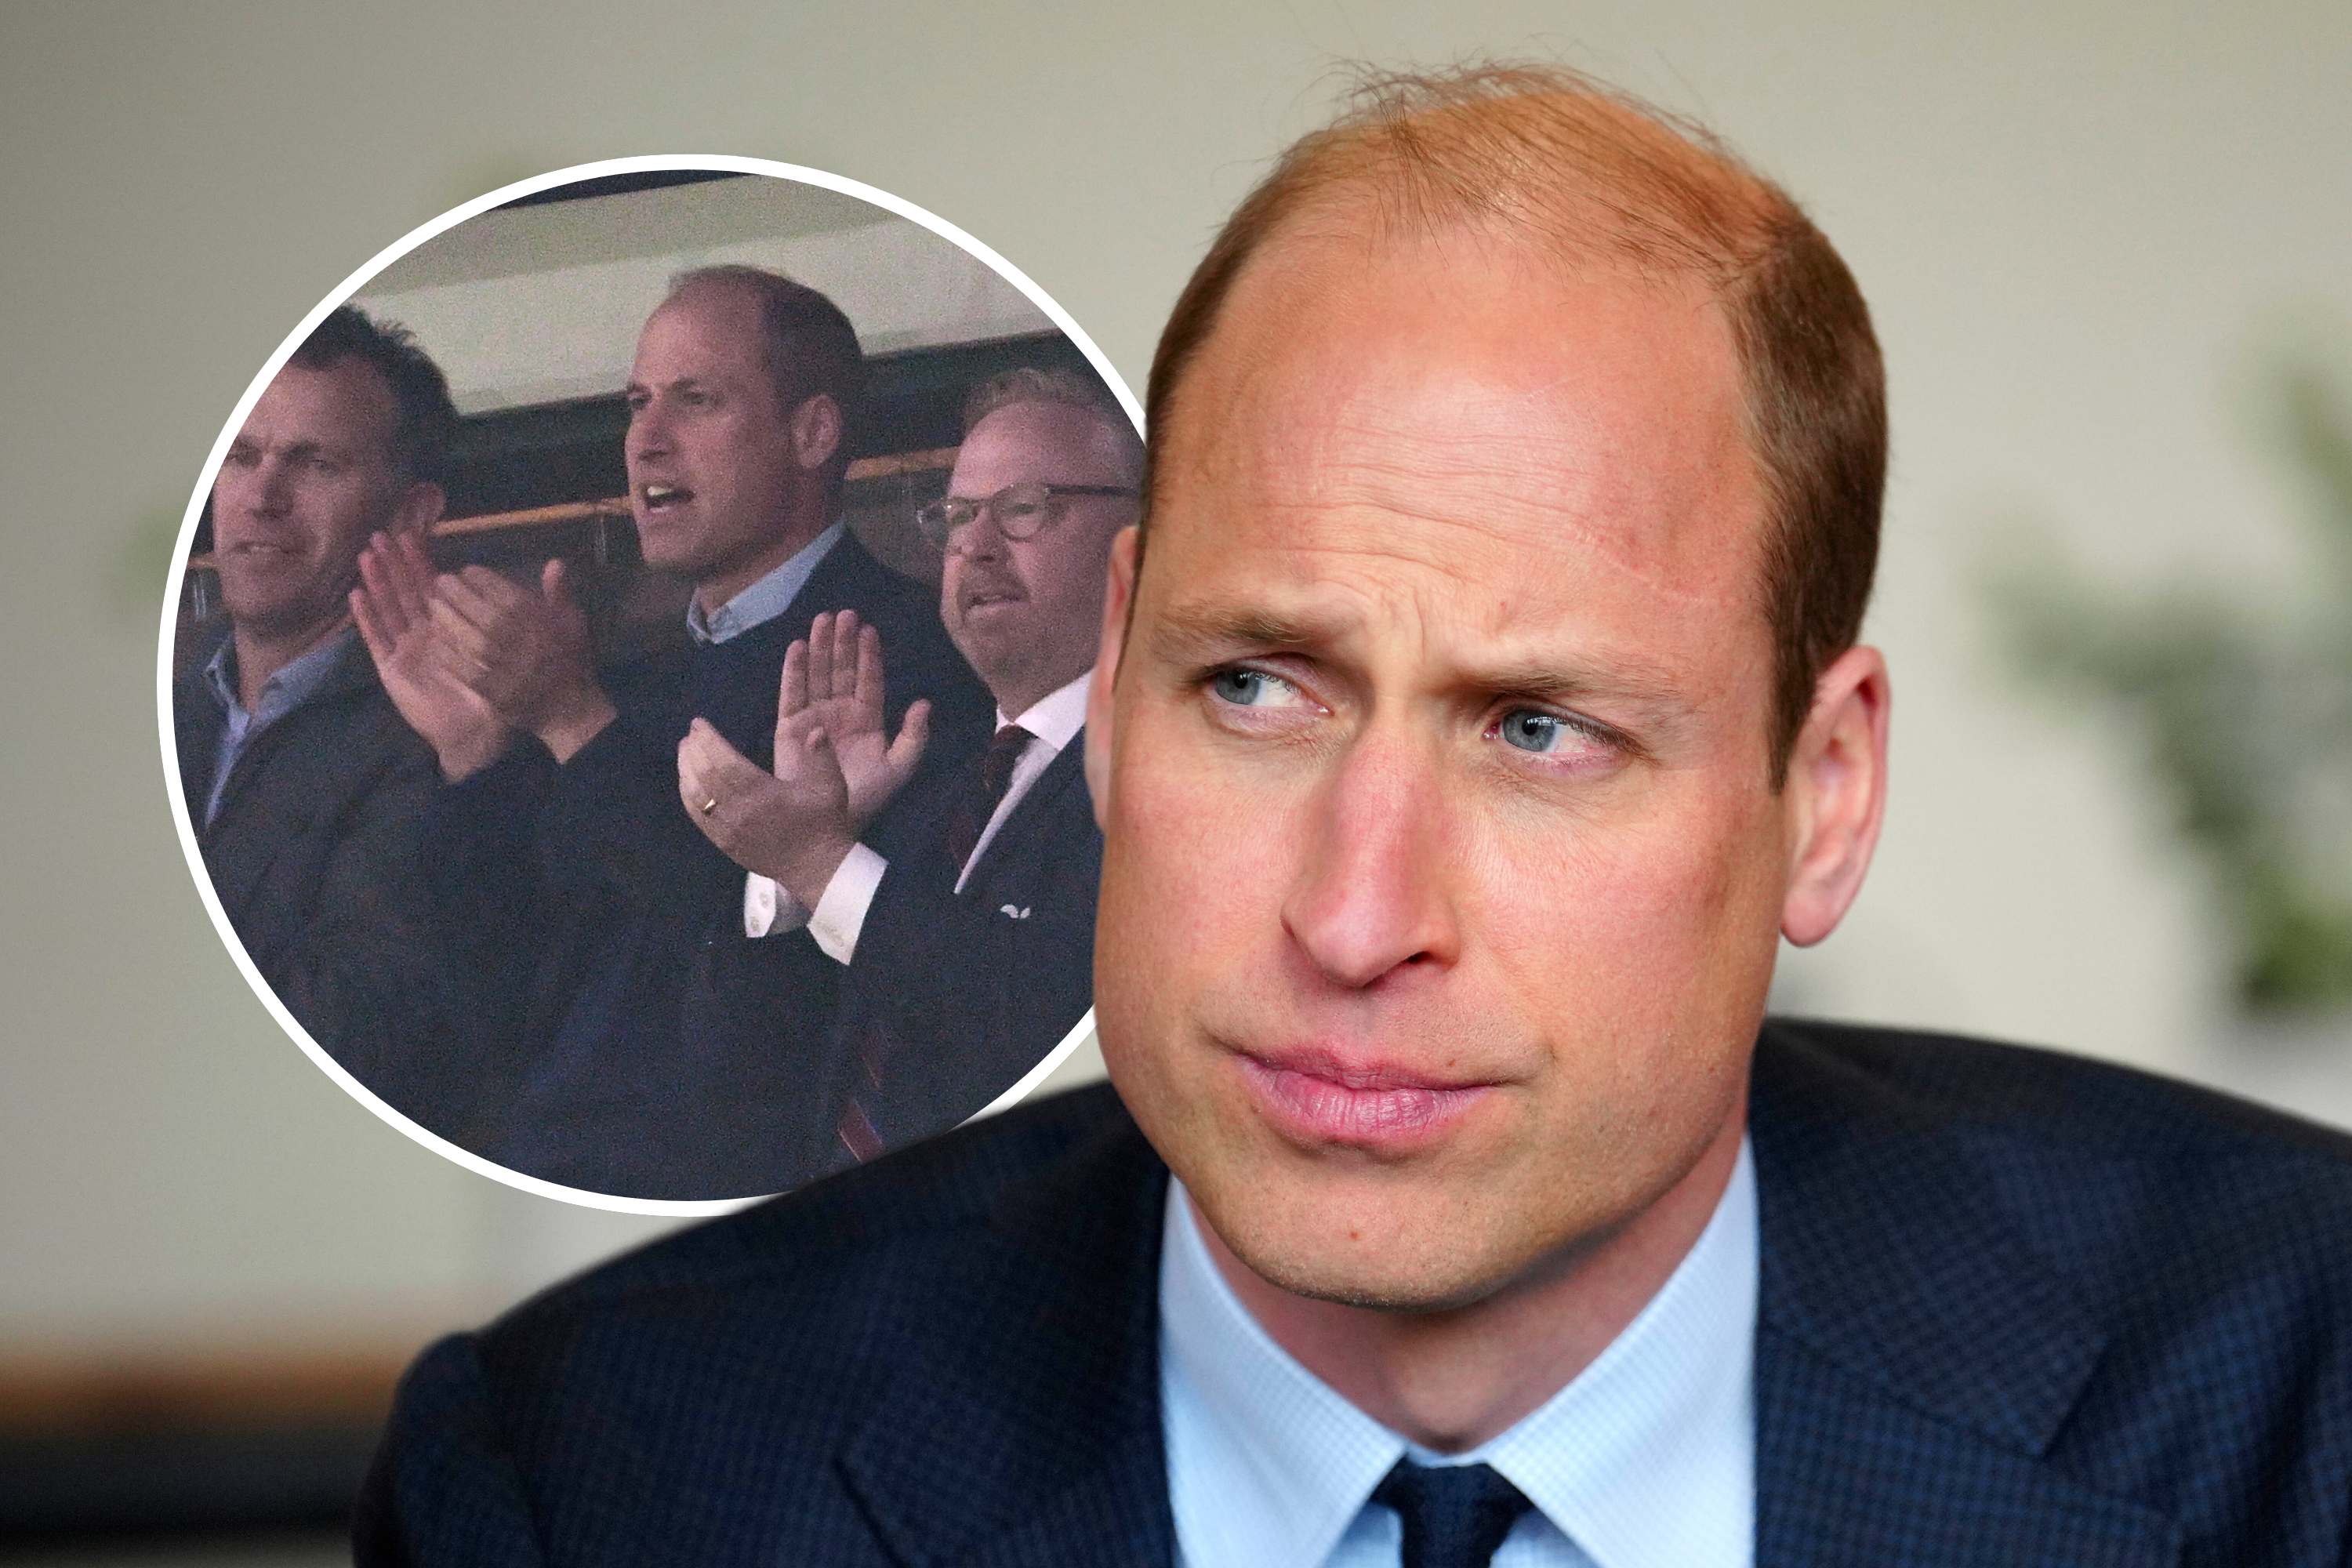 Prince William going out on Princess Charlotte’s birthday raises eyebrows